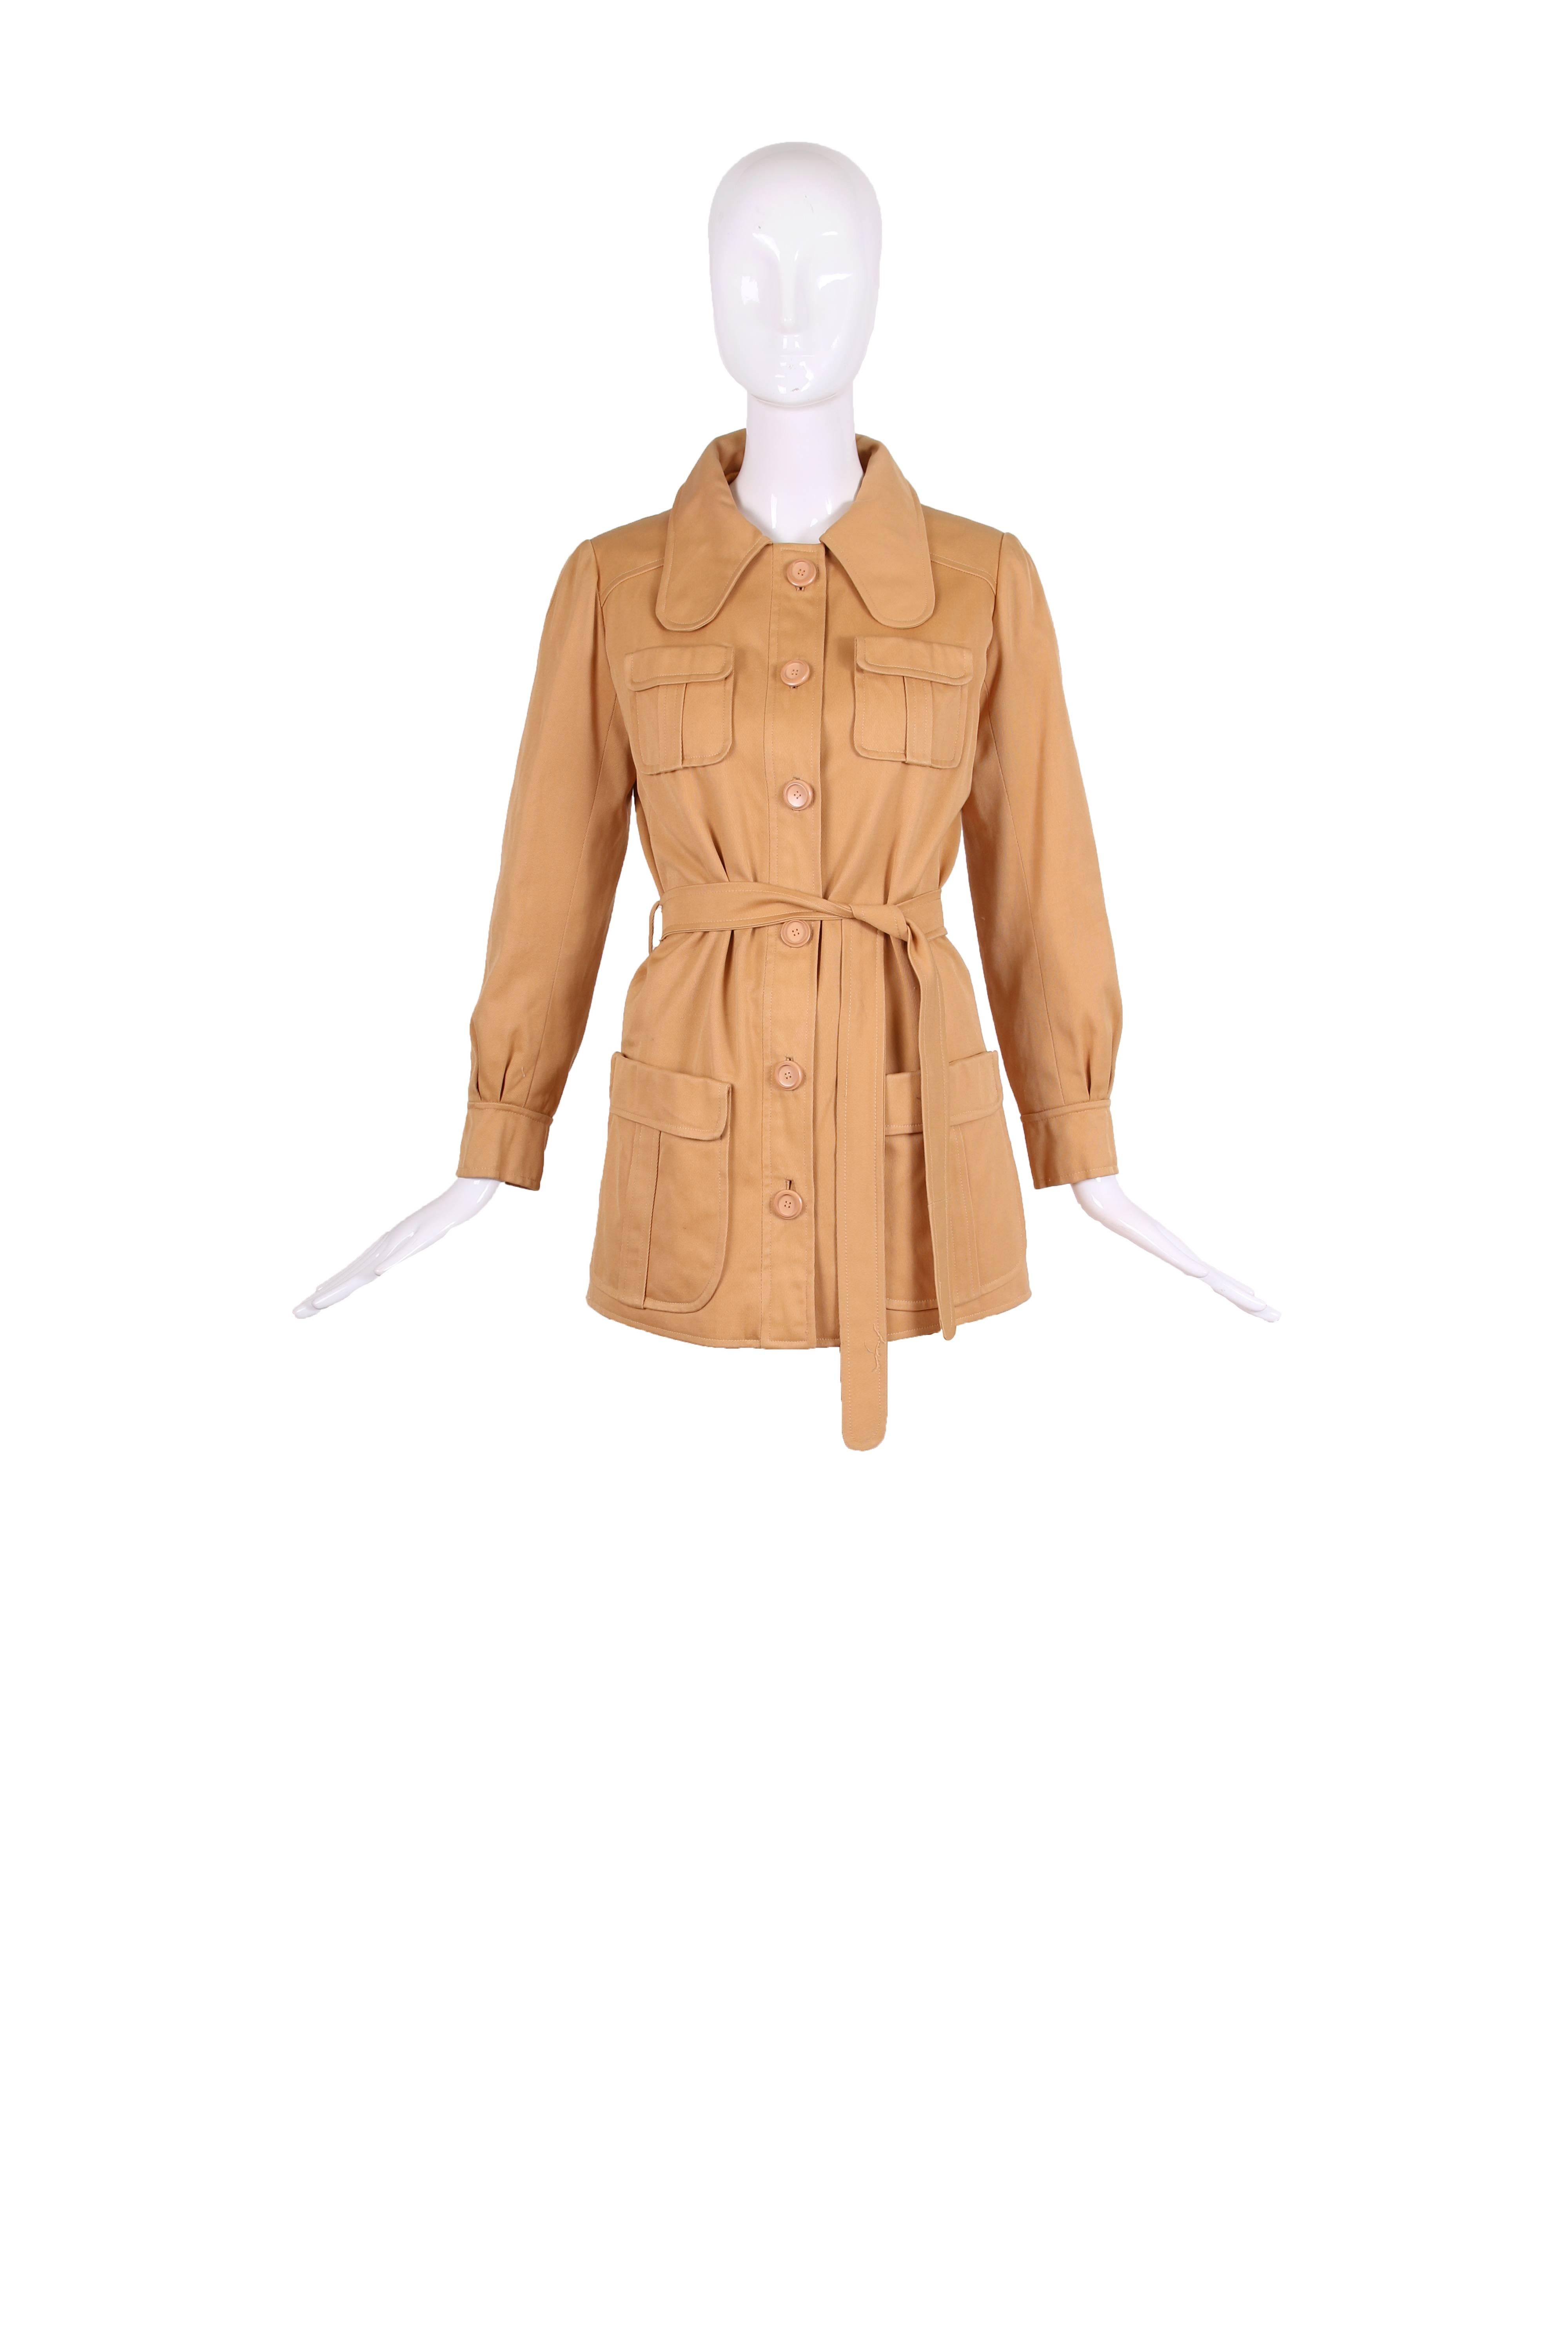 Unlabeled 1970's Ungaro belted caramel-colored jacket with rounded lapels, frontal pockets and matching buttons down center front and at sleeve cuffs. Though the jacket is not labeled, it is attributed to Ungaro.
MEASUREMENTS:
Shoulders -